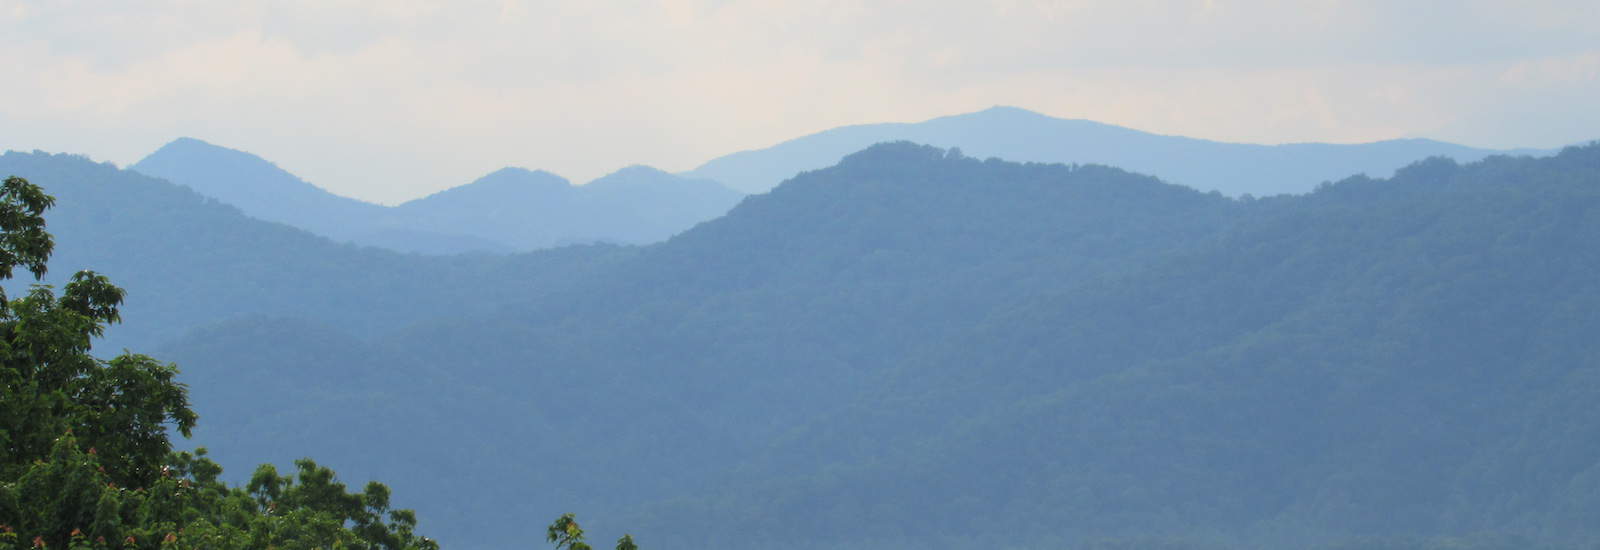 View of the Mountains from Asbury Place Kingsport